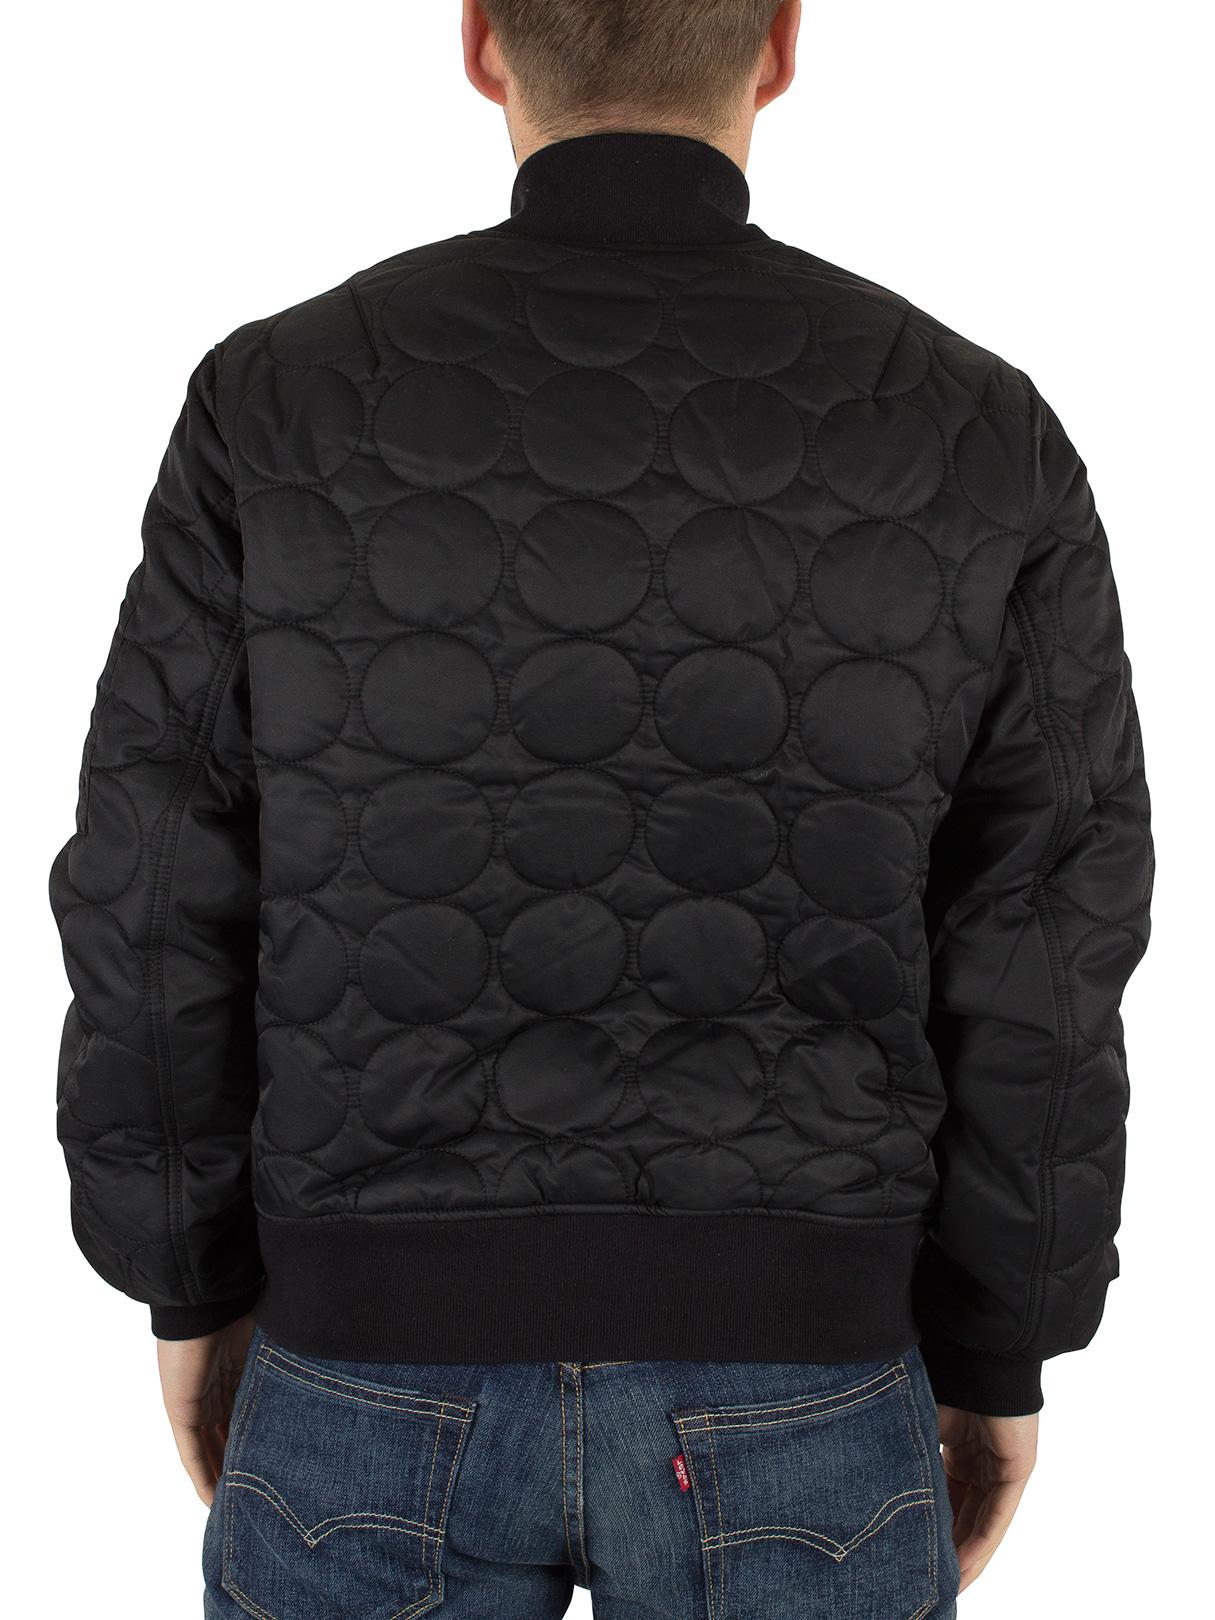 converse quilted shield bomber jacket